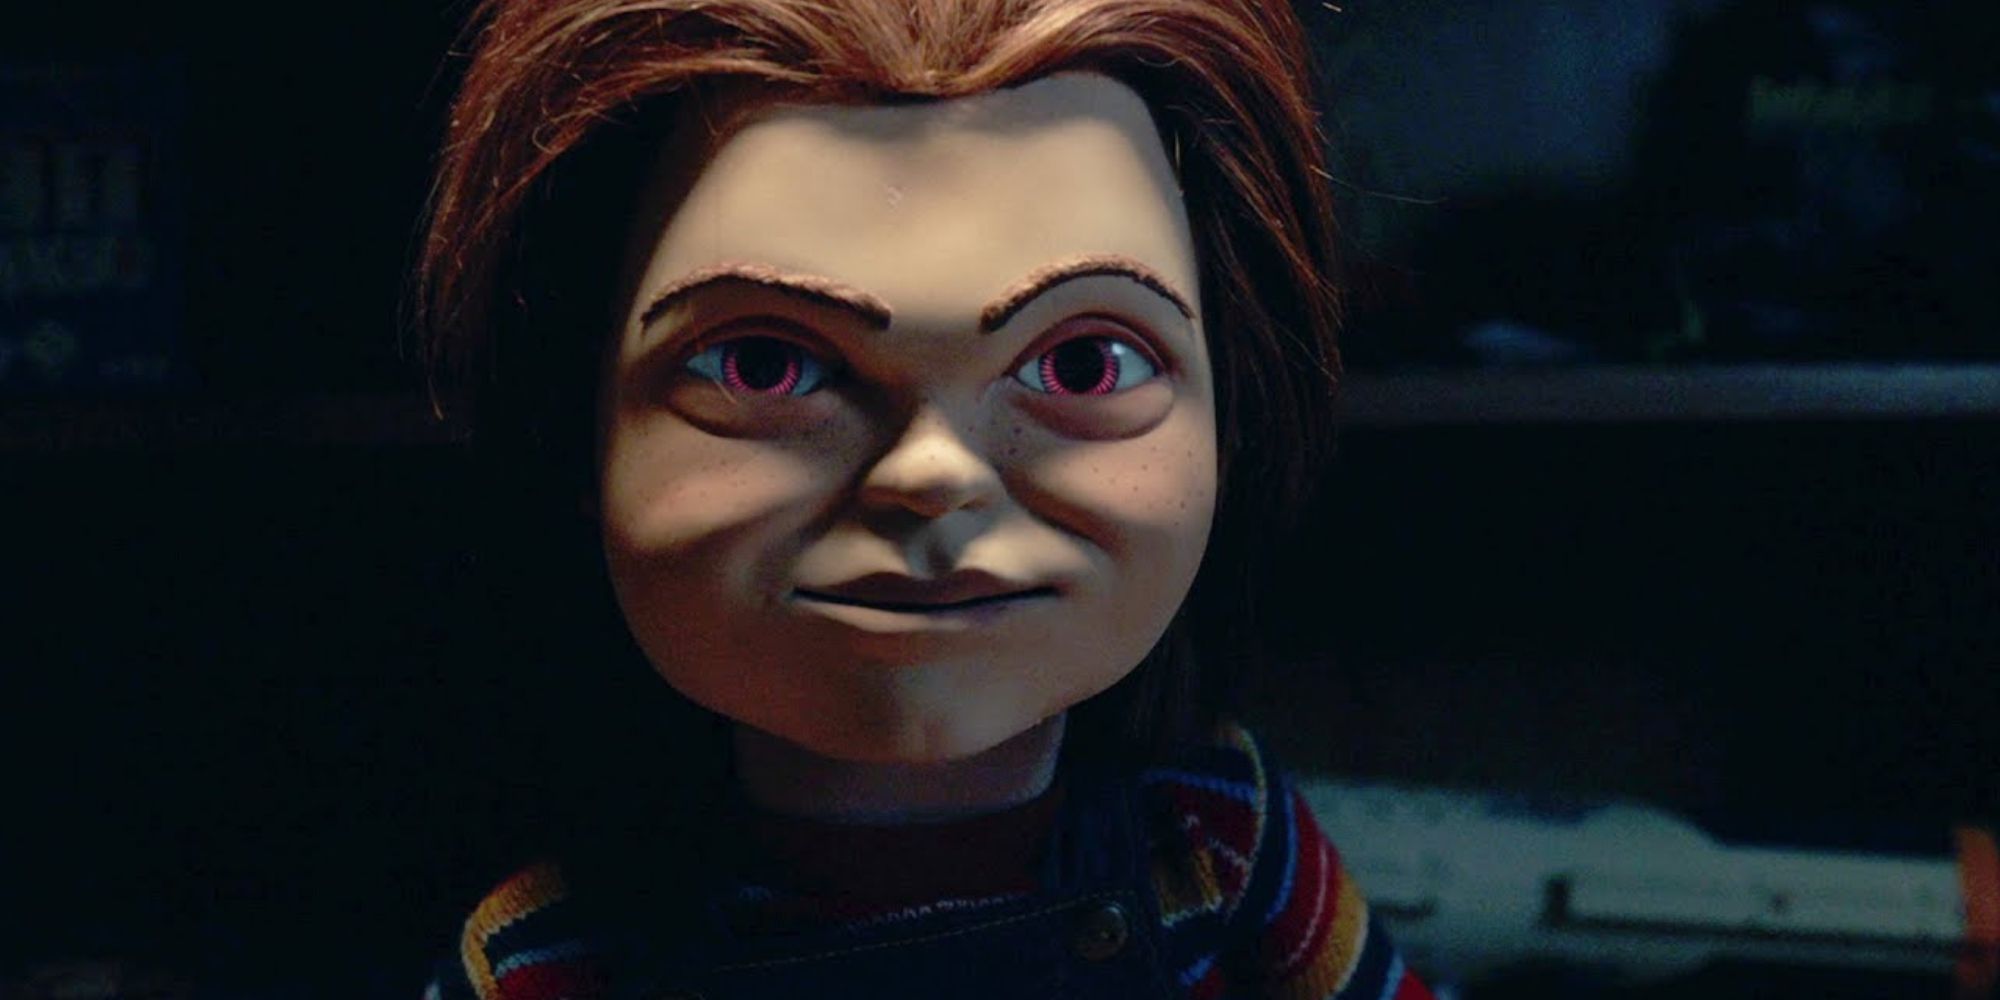 Updated version of Chucky 